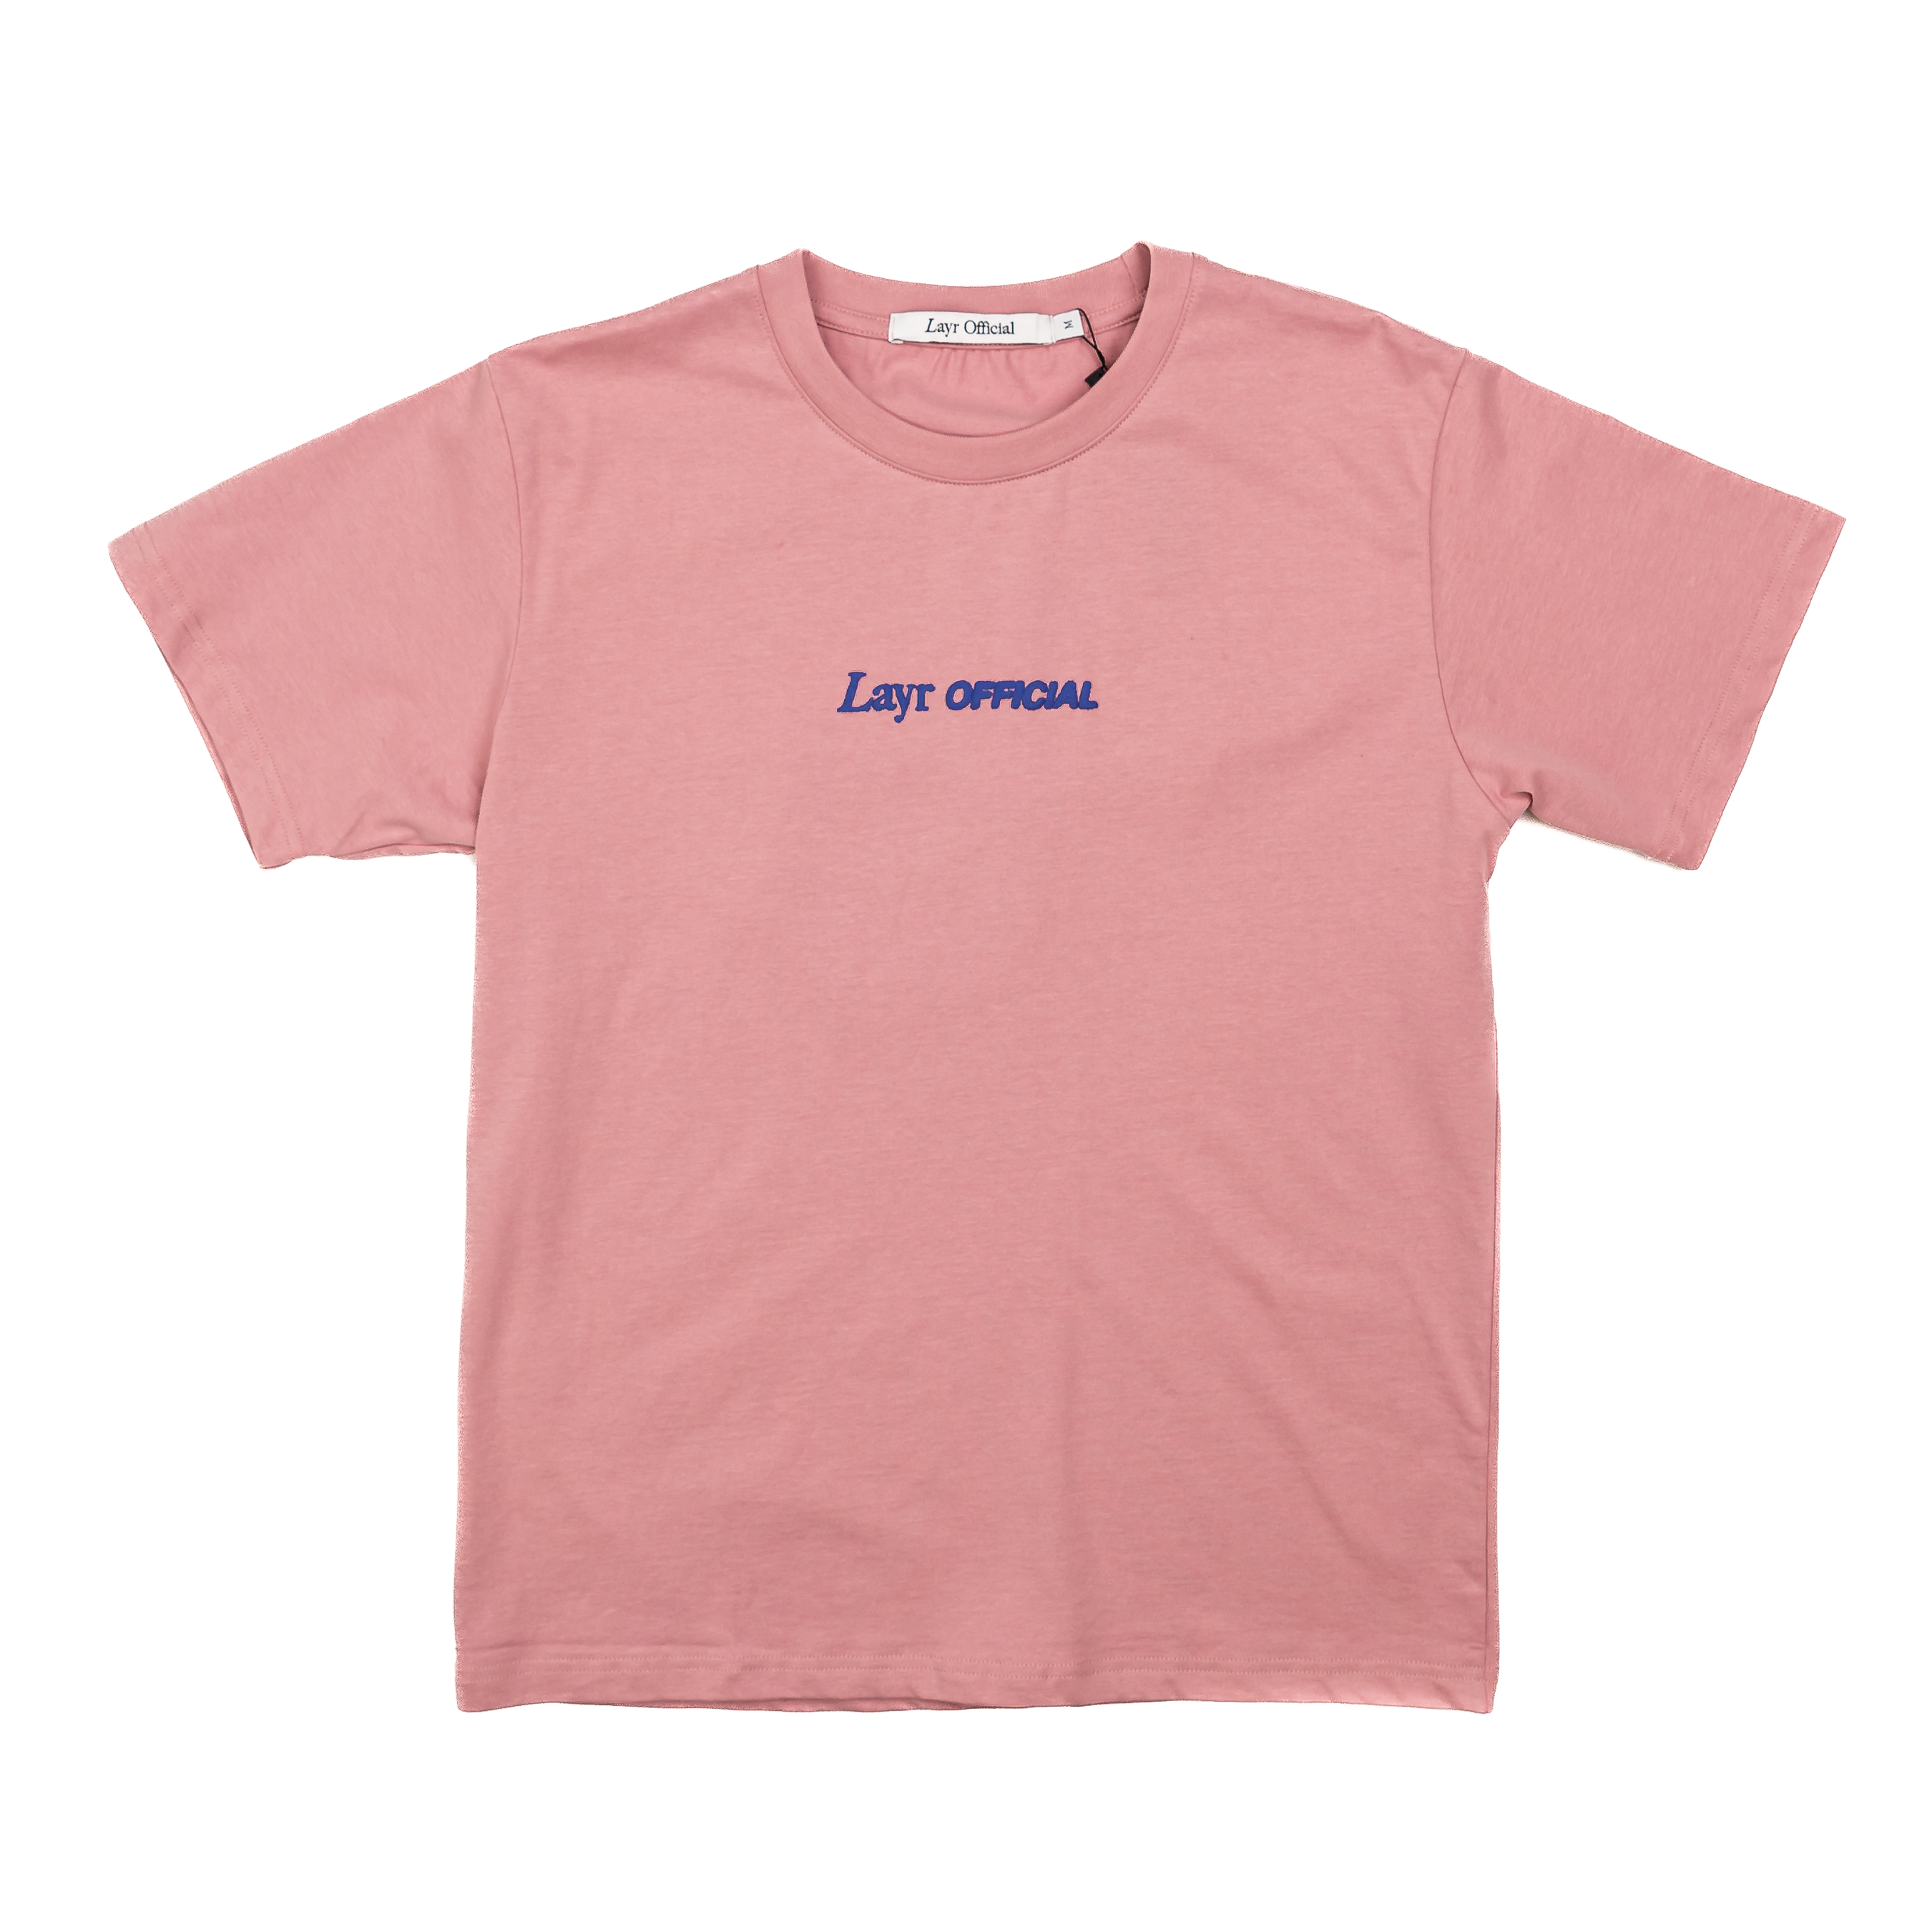 – Washed Puff Official Layr LO New Tee, Pink